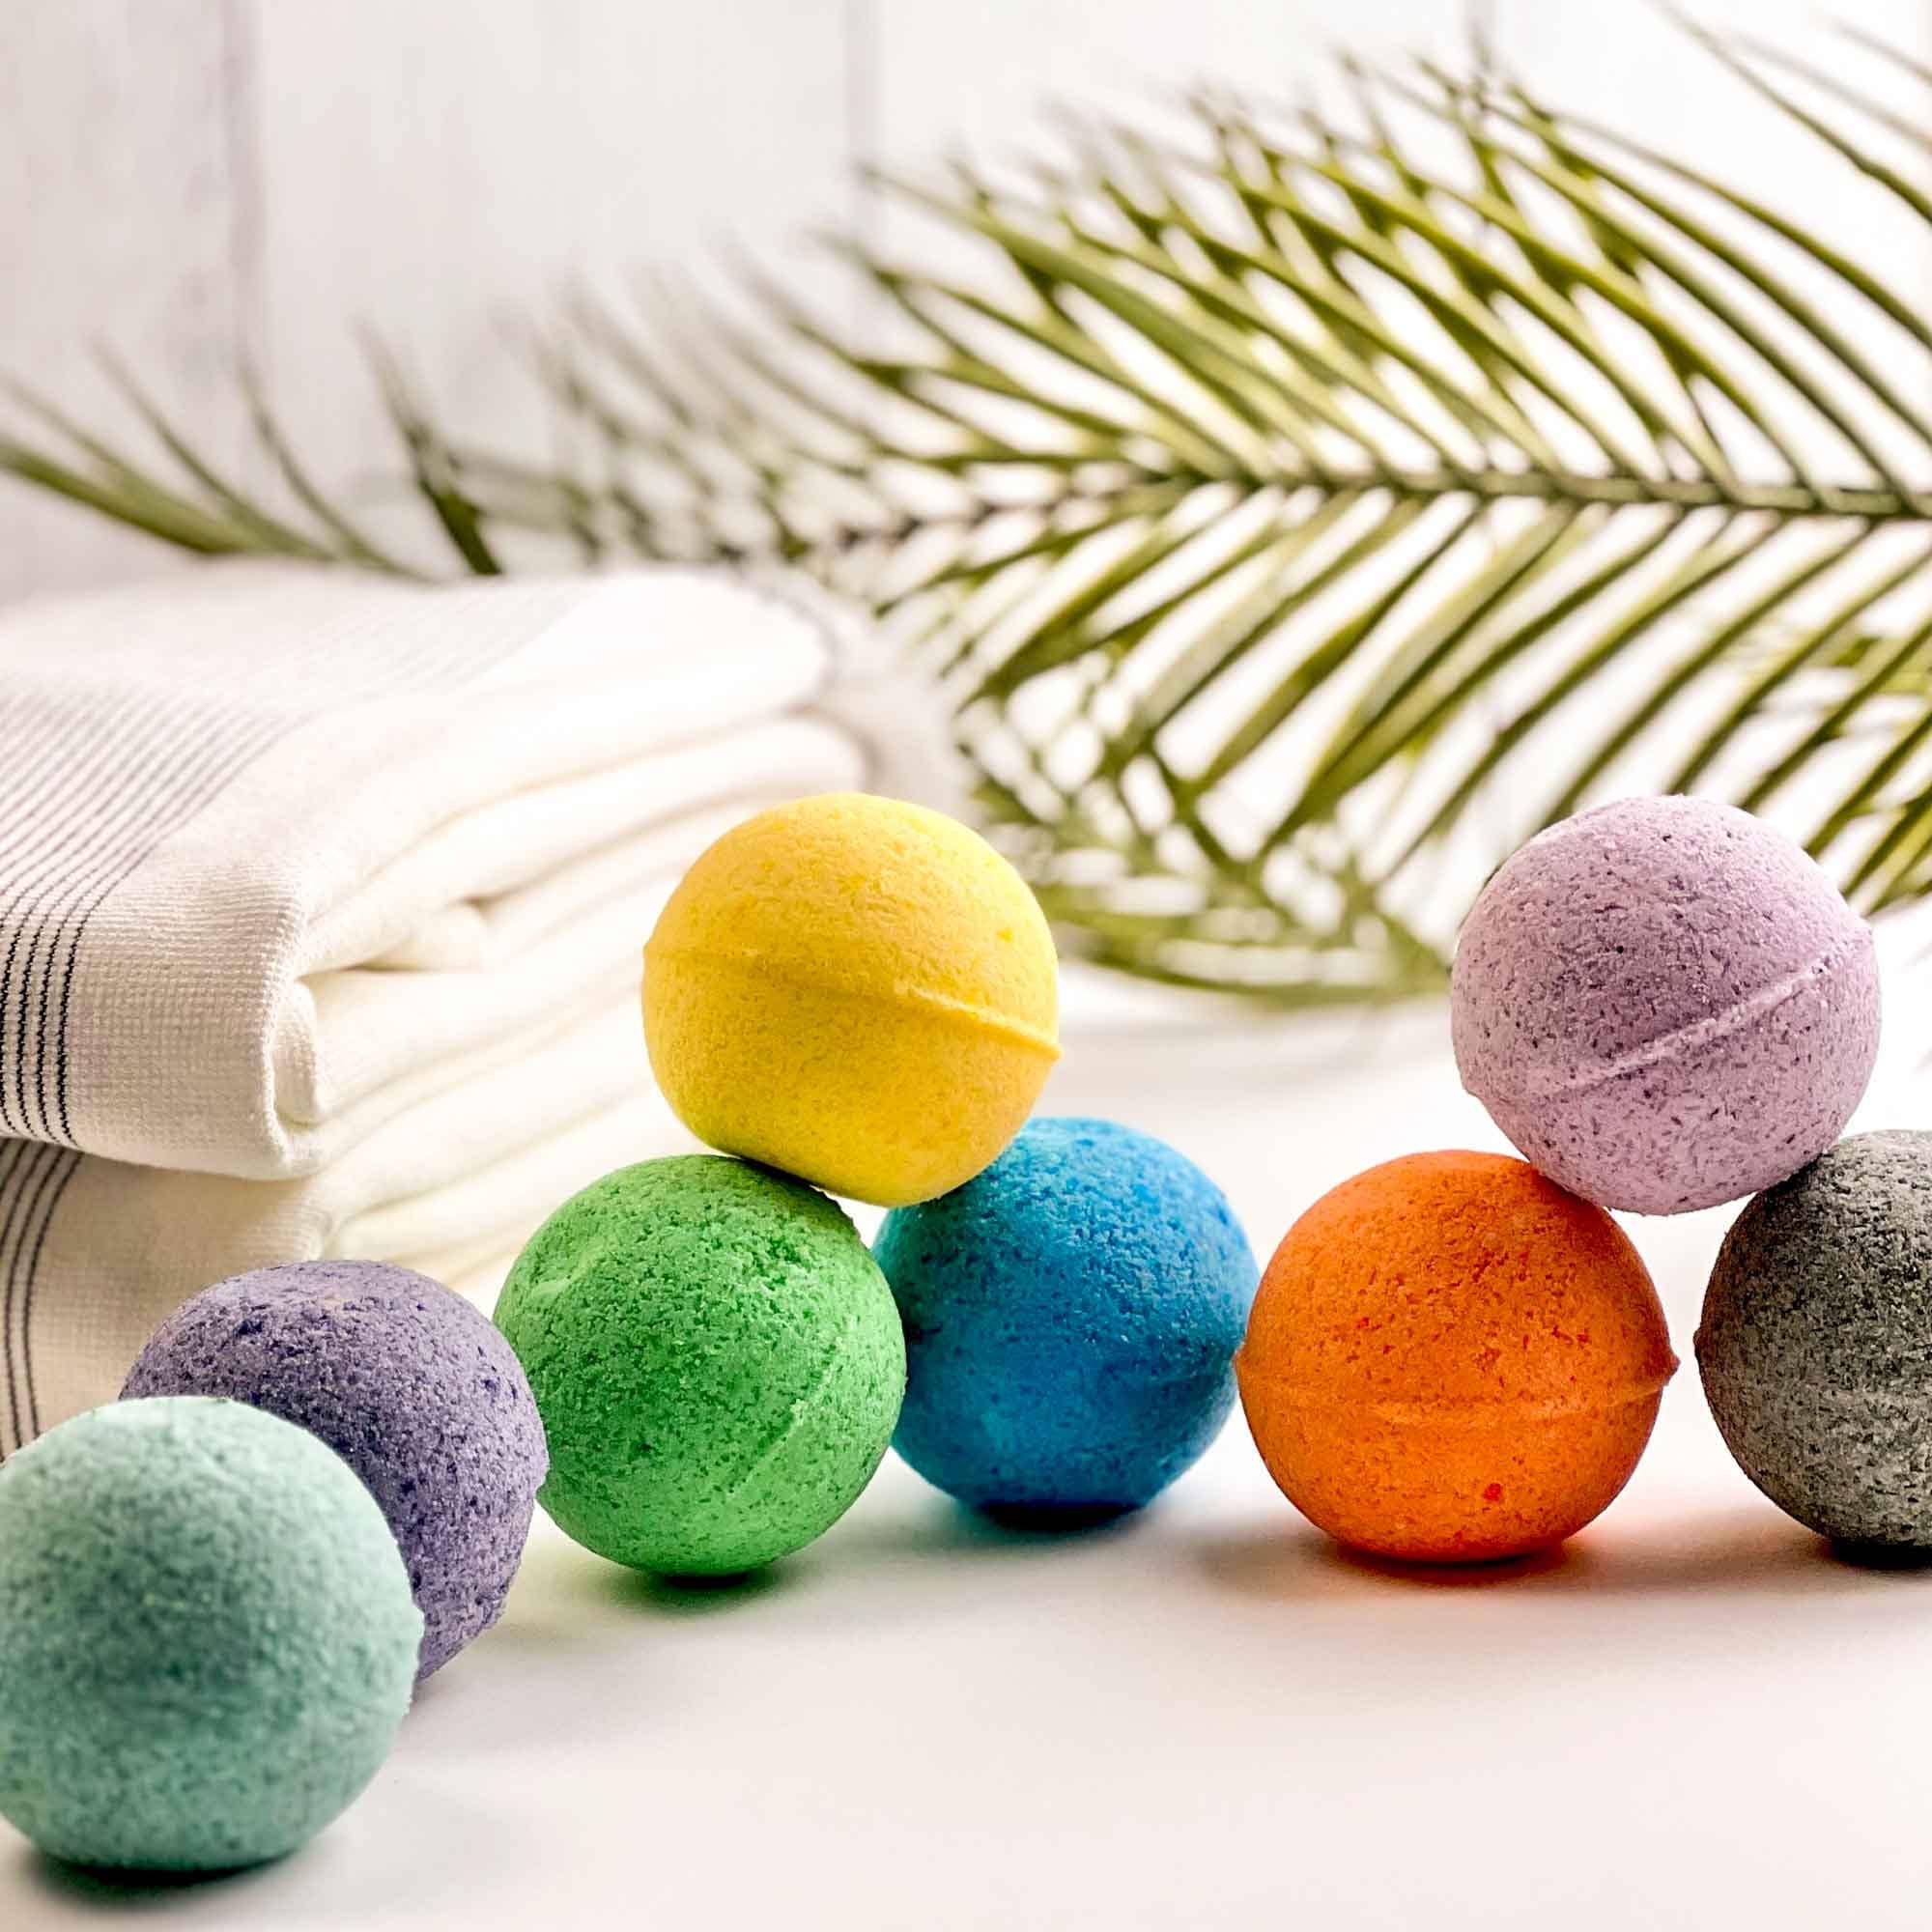 Experience Blissful Luxury with our Handmade Sugar Crystal Bath Bombs | Elevate Your Bathing Ritual with Nourishing Moisture and Fragrance!